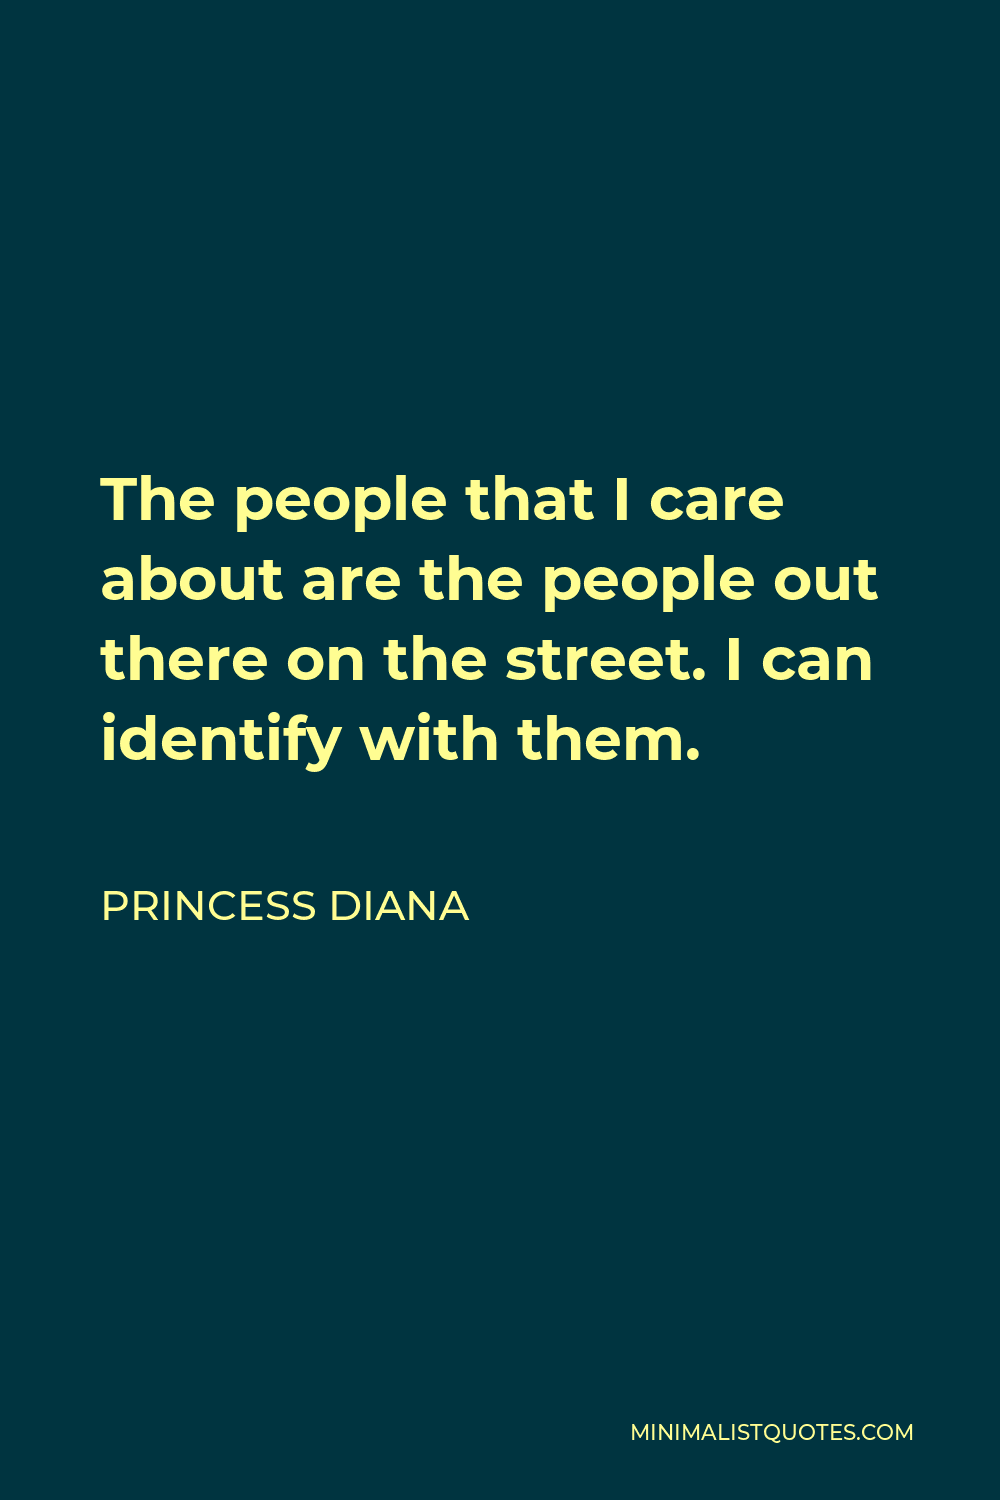 Princess Diana Quote - The people that I care about are the people out there on the street. I can identify with them.